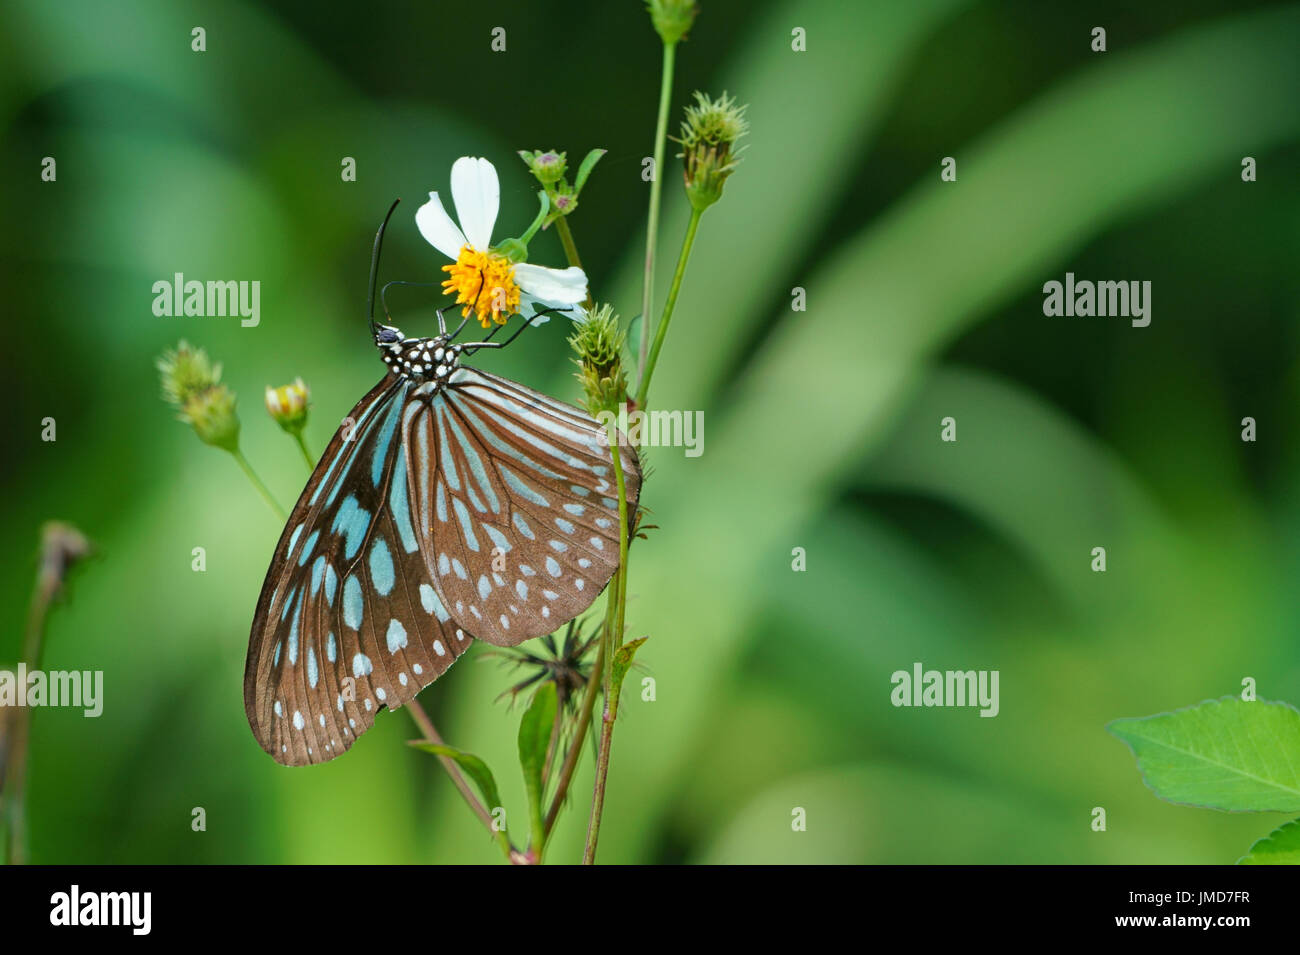 Butterfly with bidens pilosa flower Stock Photo